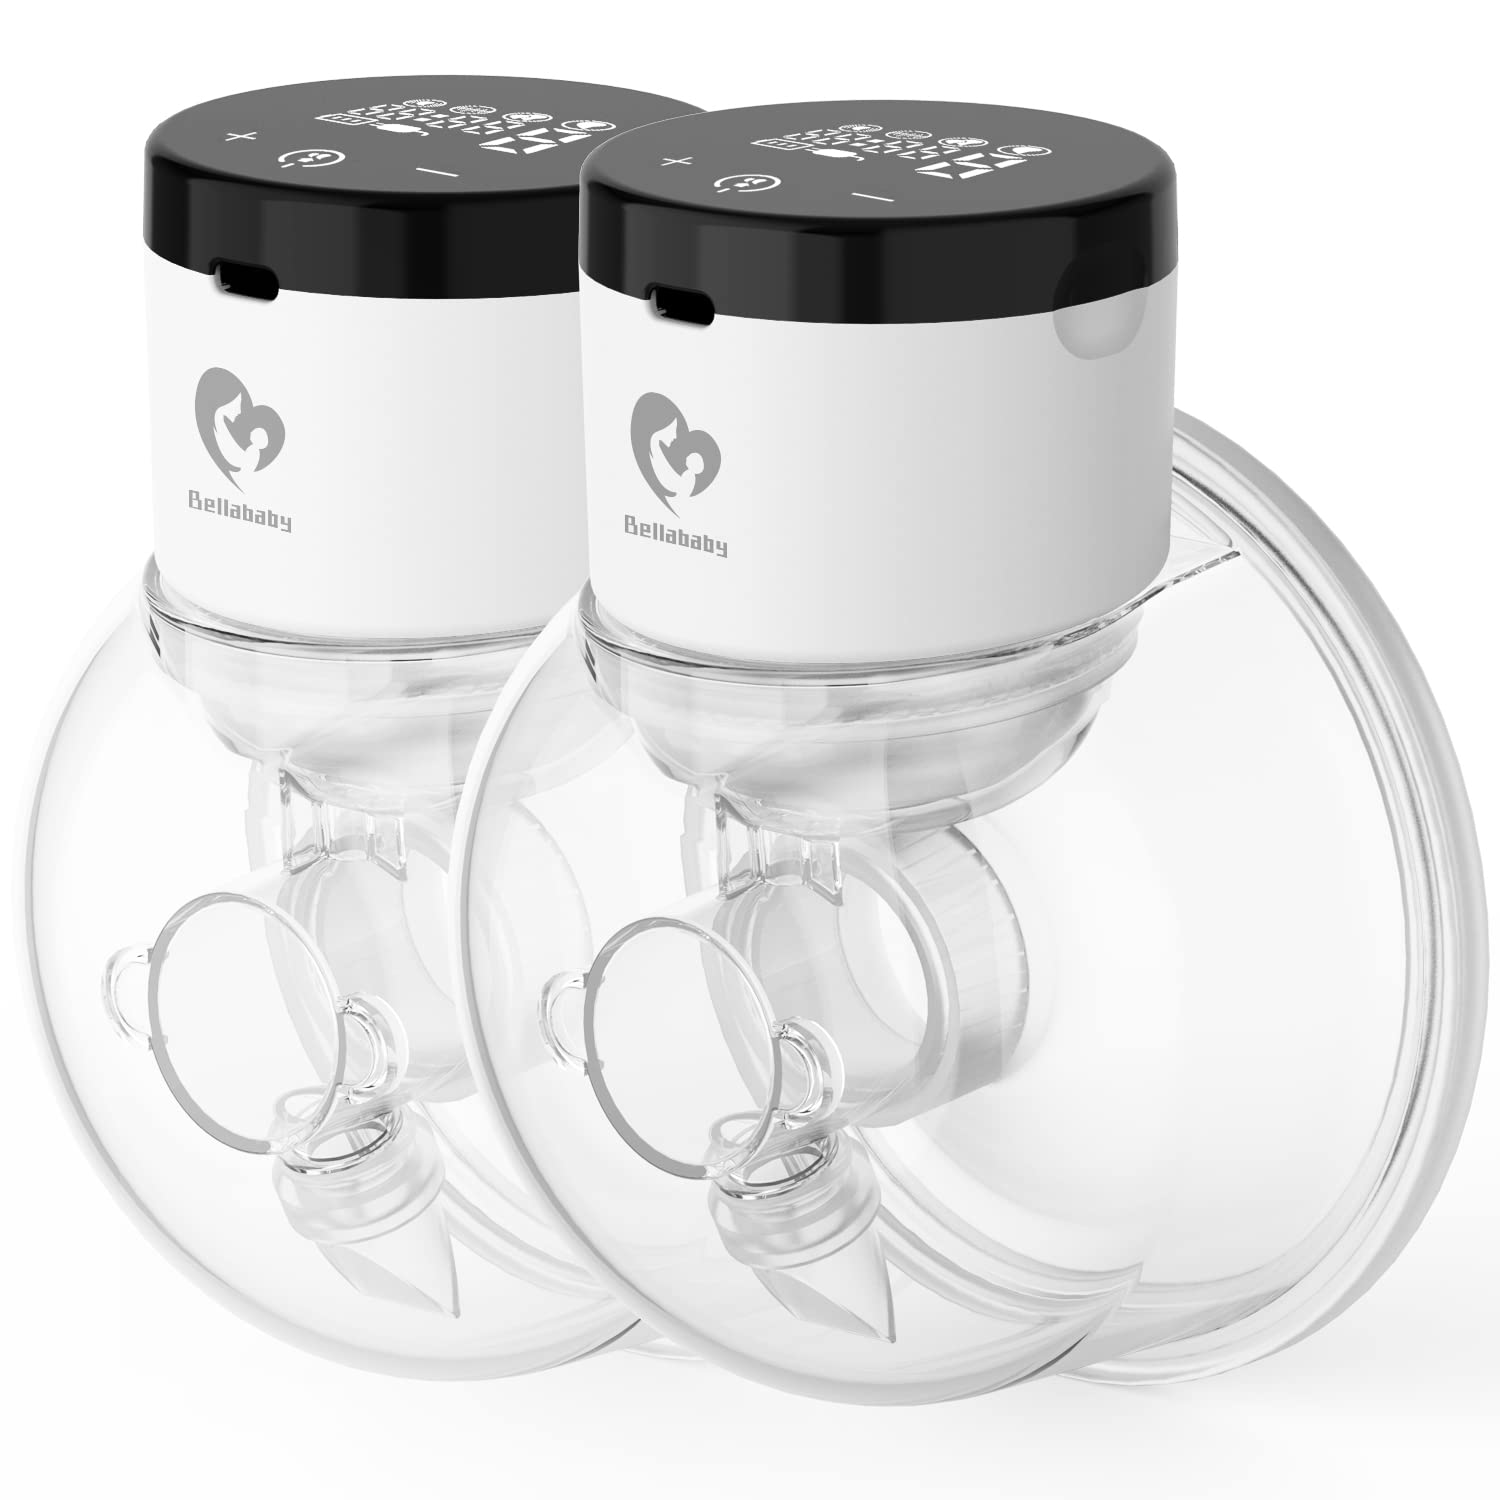 Spectra Handsfree Shield Cups (Pack of 2) Effective Hands Free Pumping.  (28mm Set of 2)